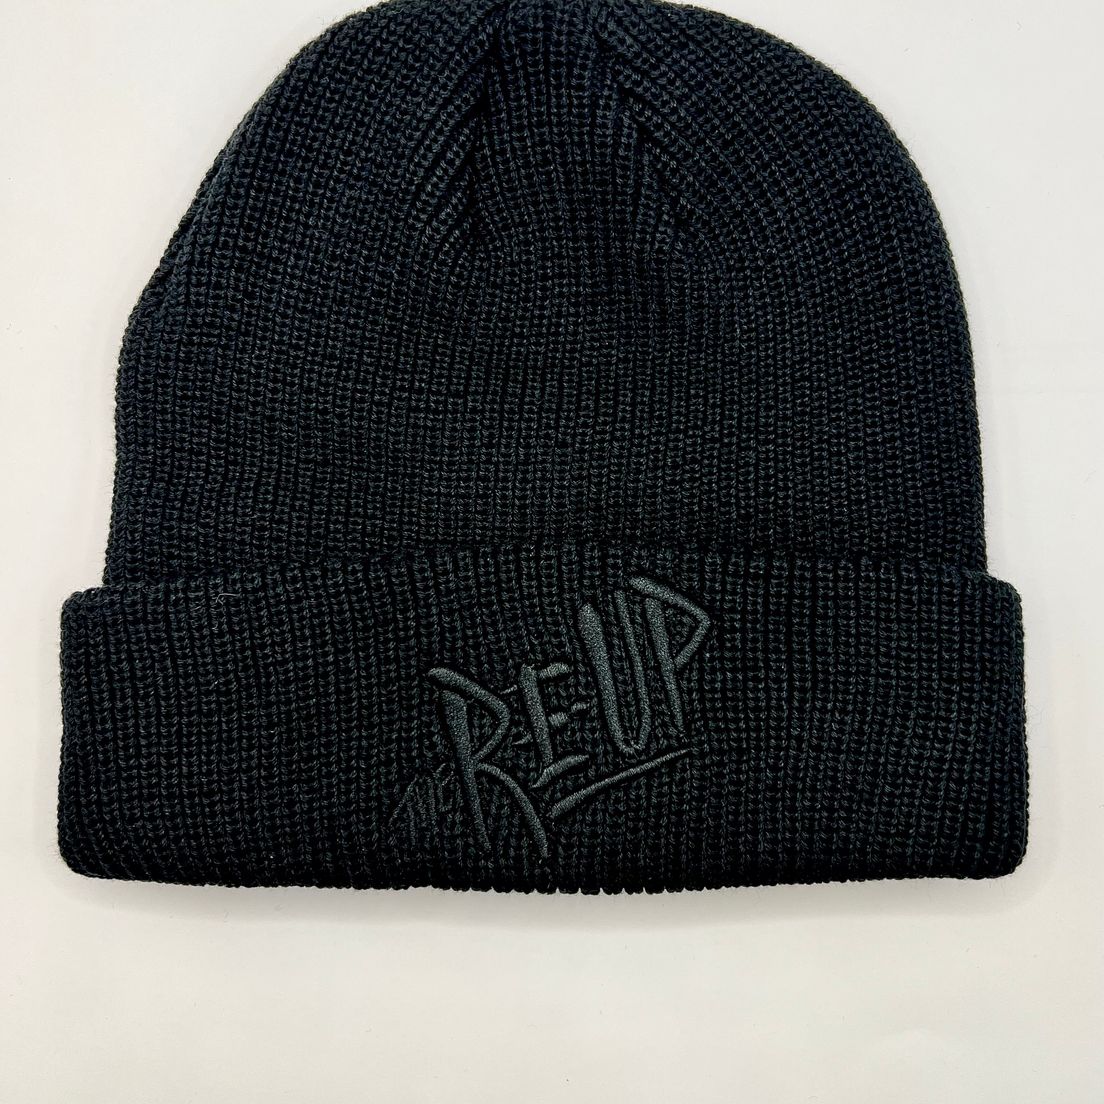 PRE-ORDER ONLY *Deal! $15 Incognito Edition Beanie - The Re-Up + Preroll